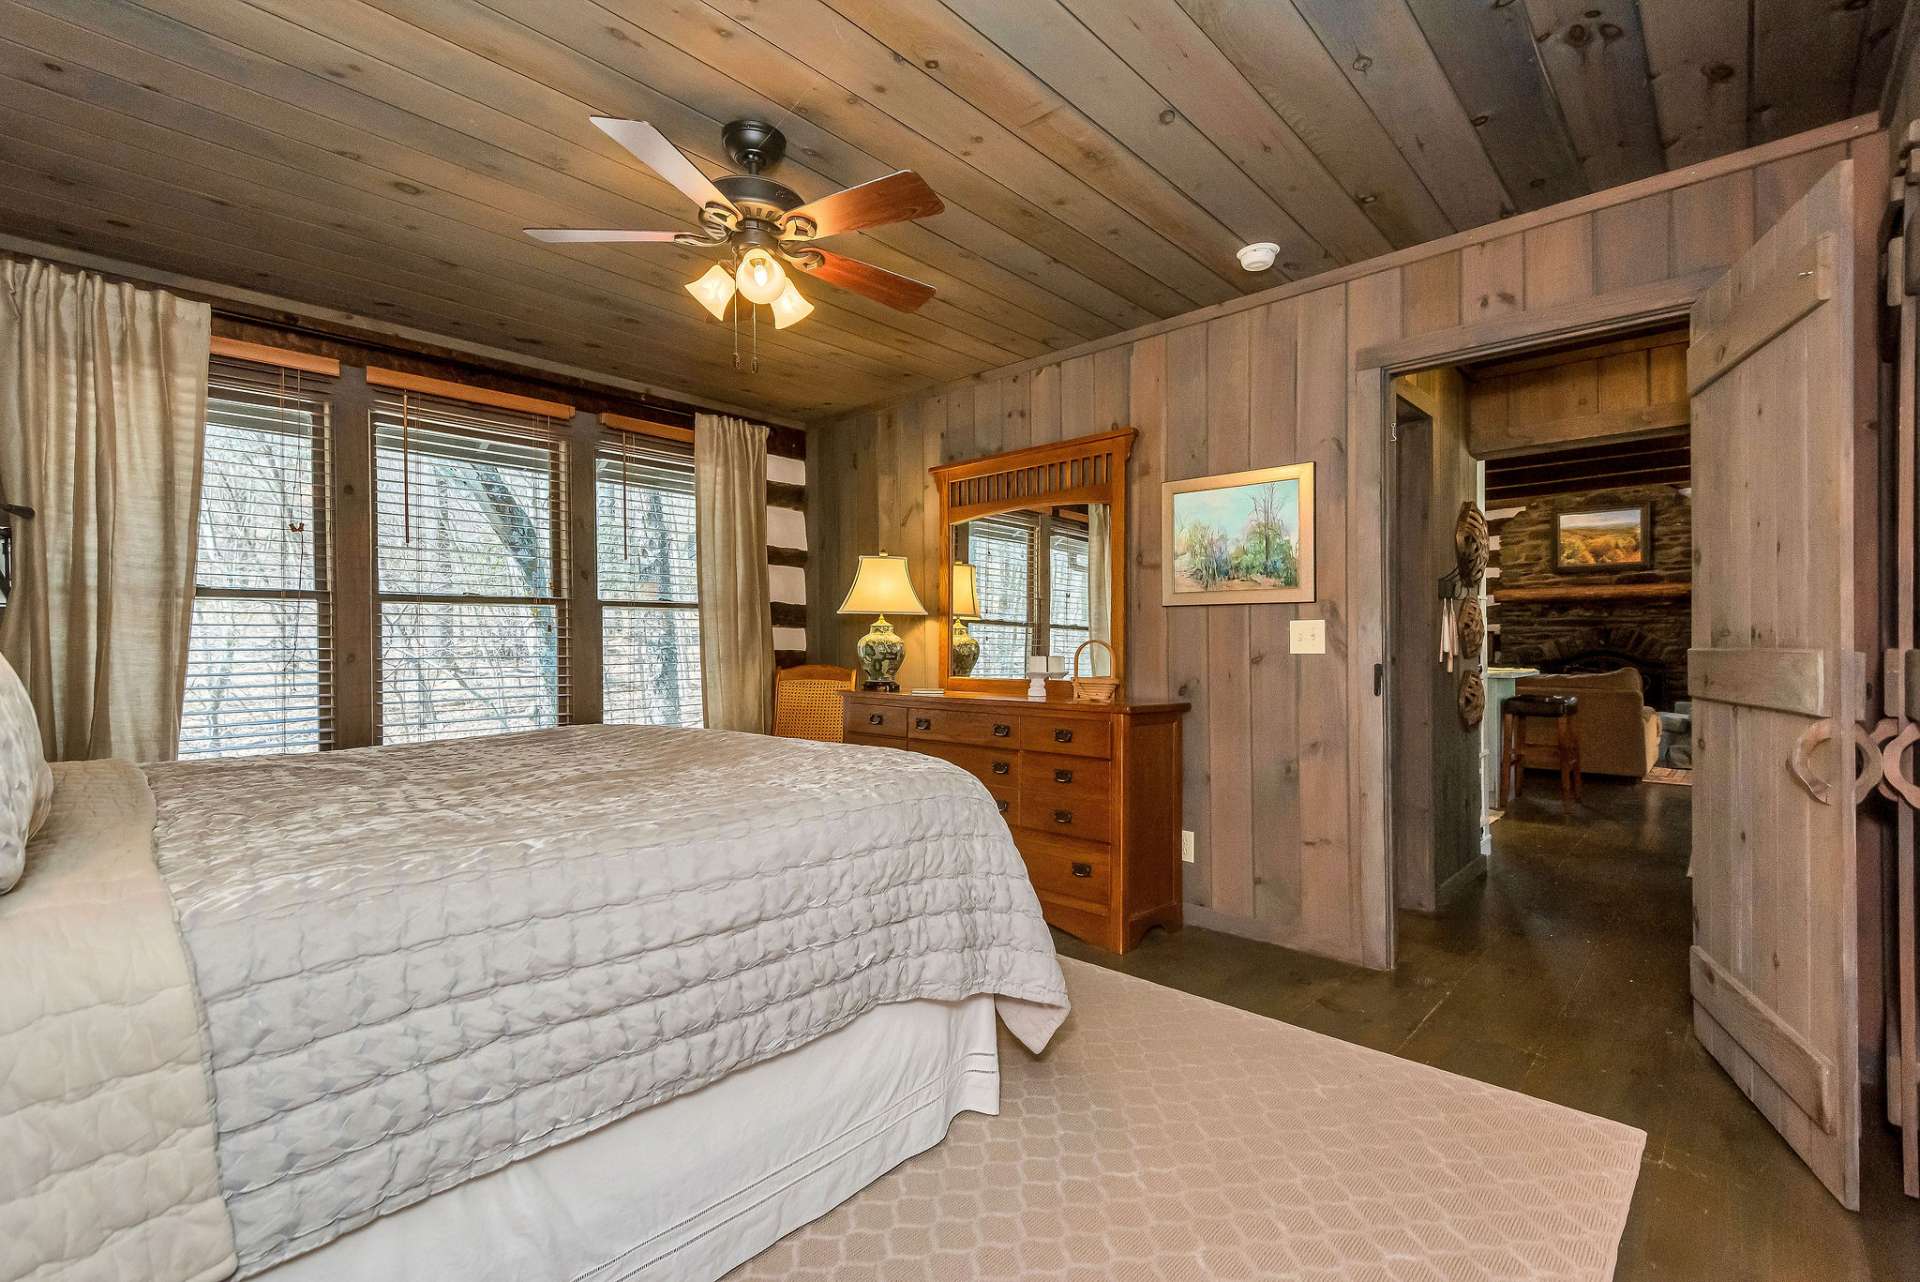 With its proximity to the noisy mountain stream behind the cabin, the bedroom provides a tranquil soundtrack of flowing water, creating a soothing ambiance that promotes restful sleep and relaxation.